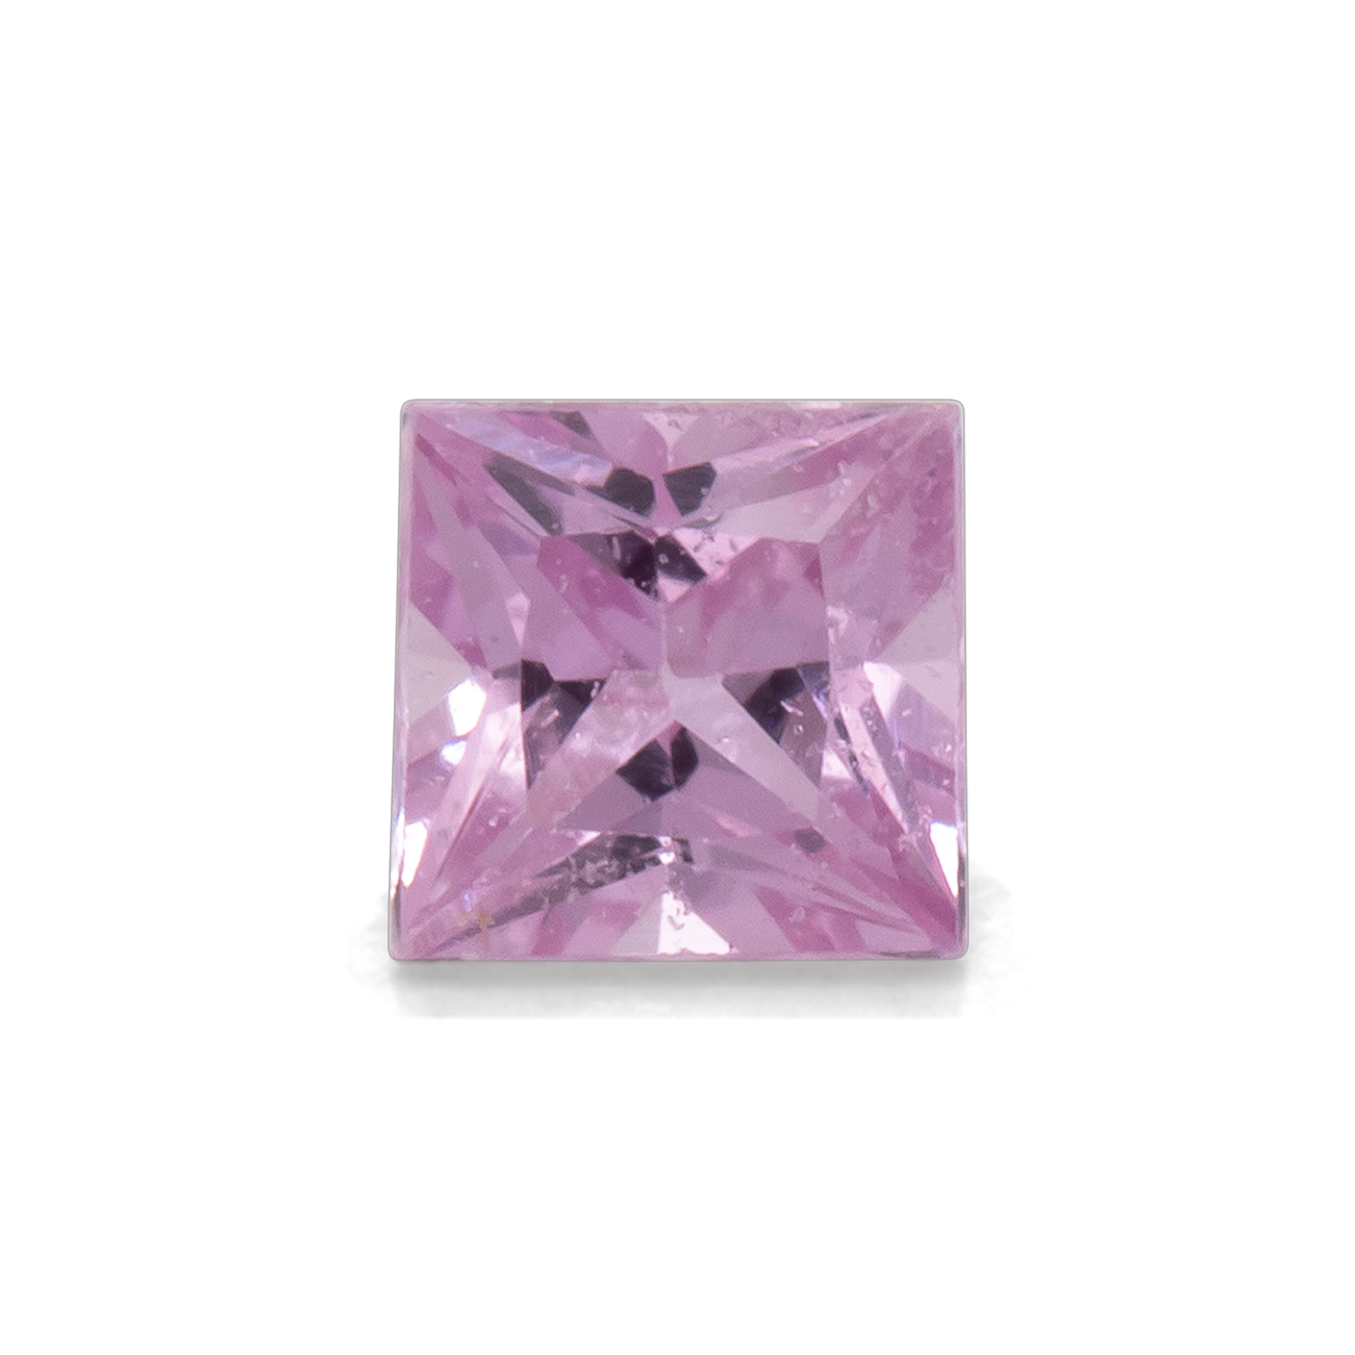 Sapphire - pink, square, 2.3x2.3 mm, 0.08 - 0.09 cts, No. XSR11247